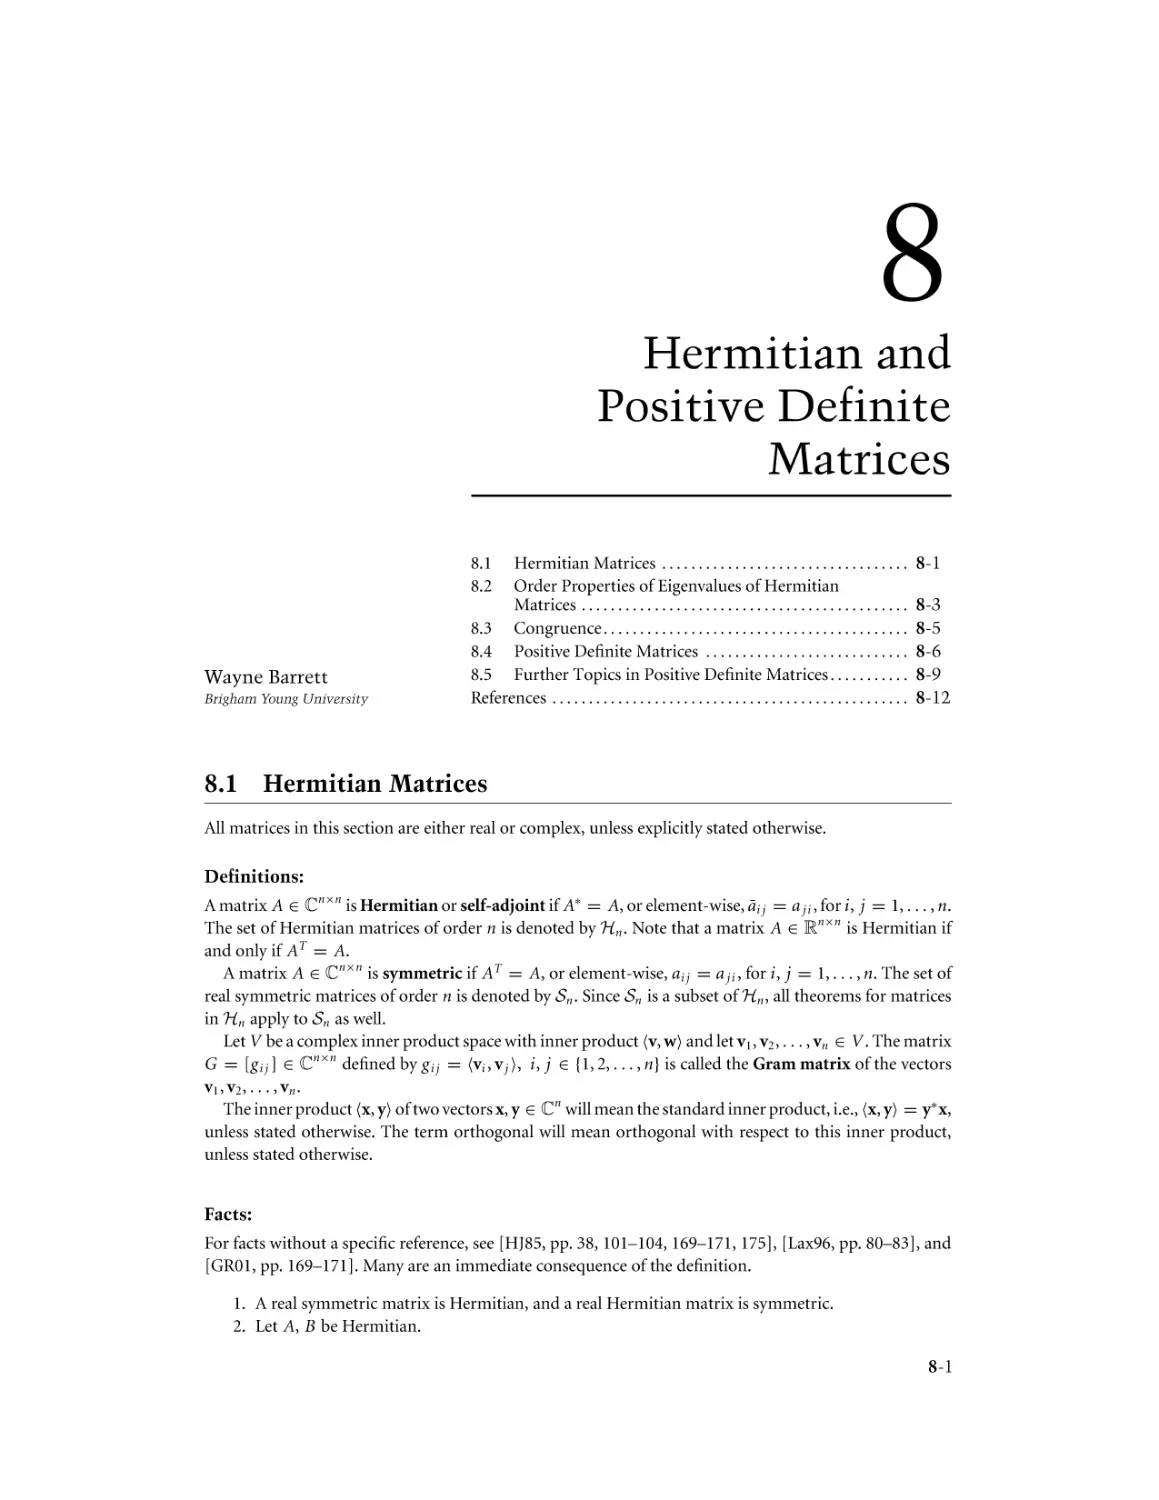 Chapter 8. Hermitian and Positive Definite Matrices